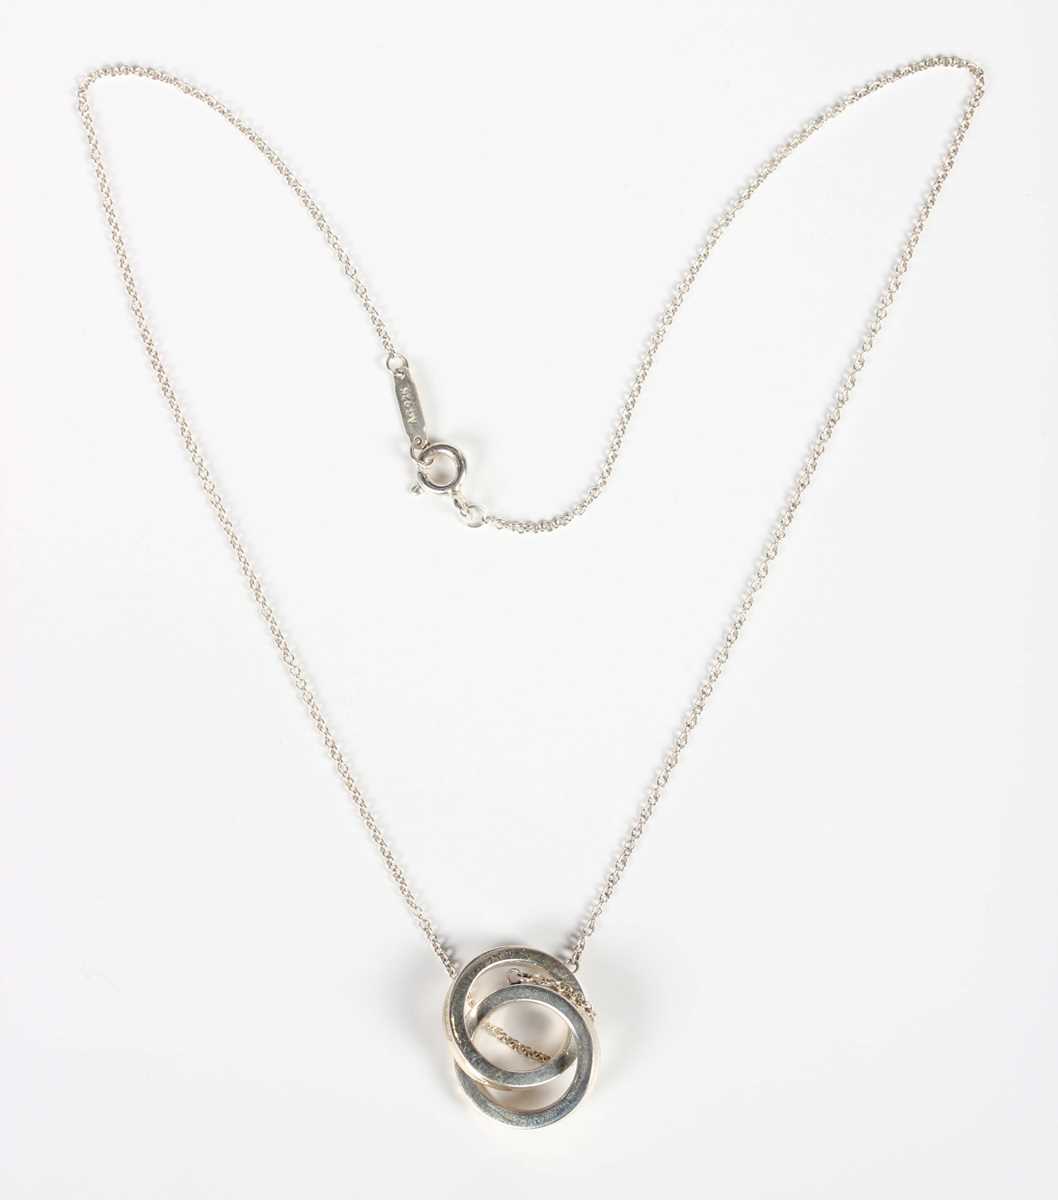 A Tiffany & Co silver interlocking circles pendant with neckchain, detailed ‘Tiffany & Co Ag925’, - Image 4 of 5